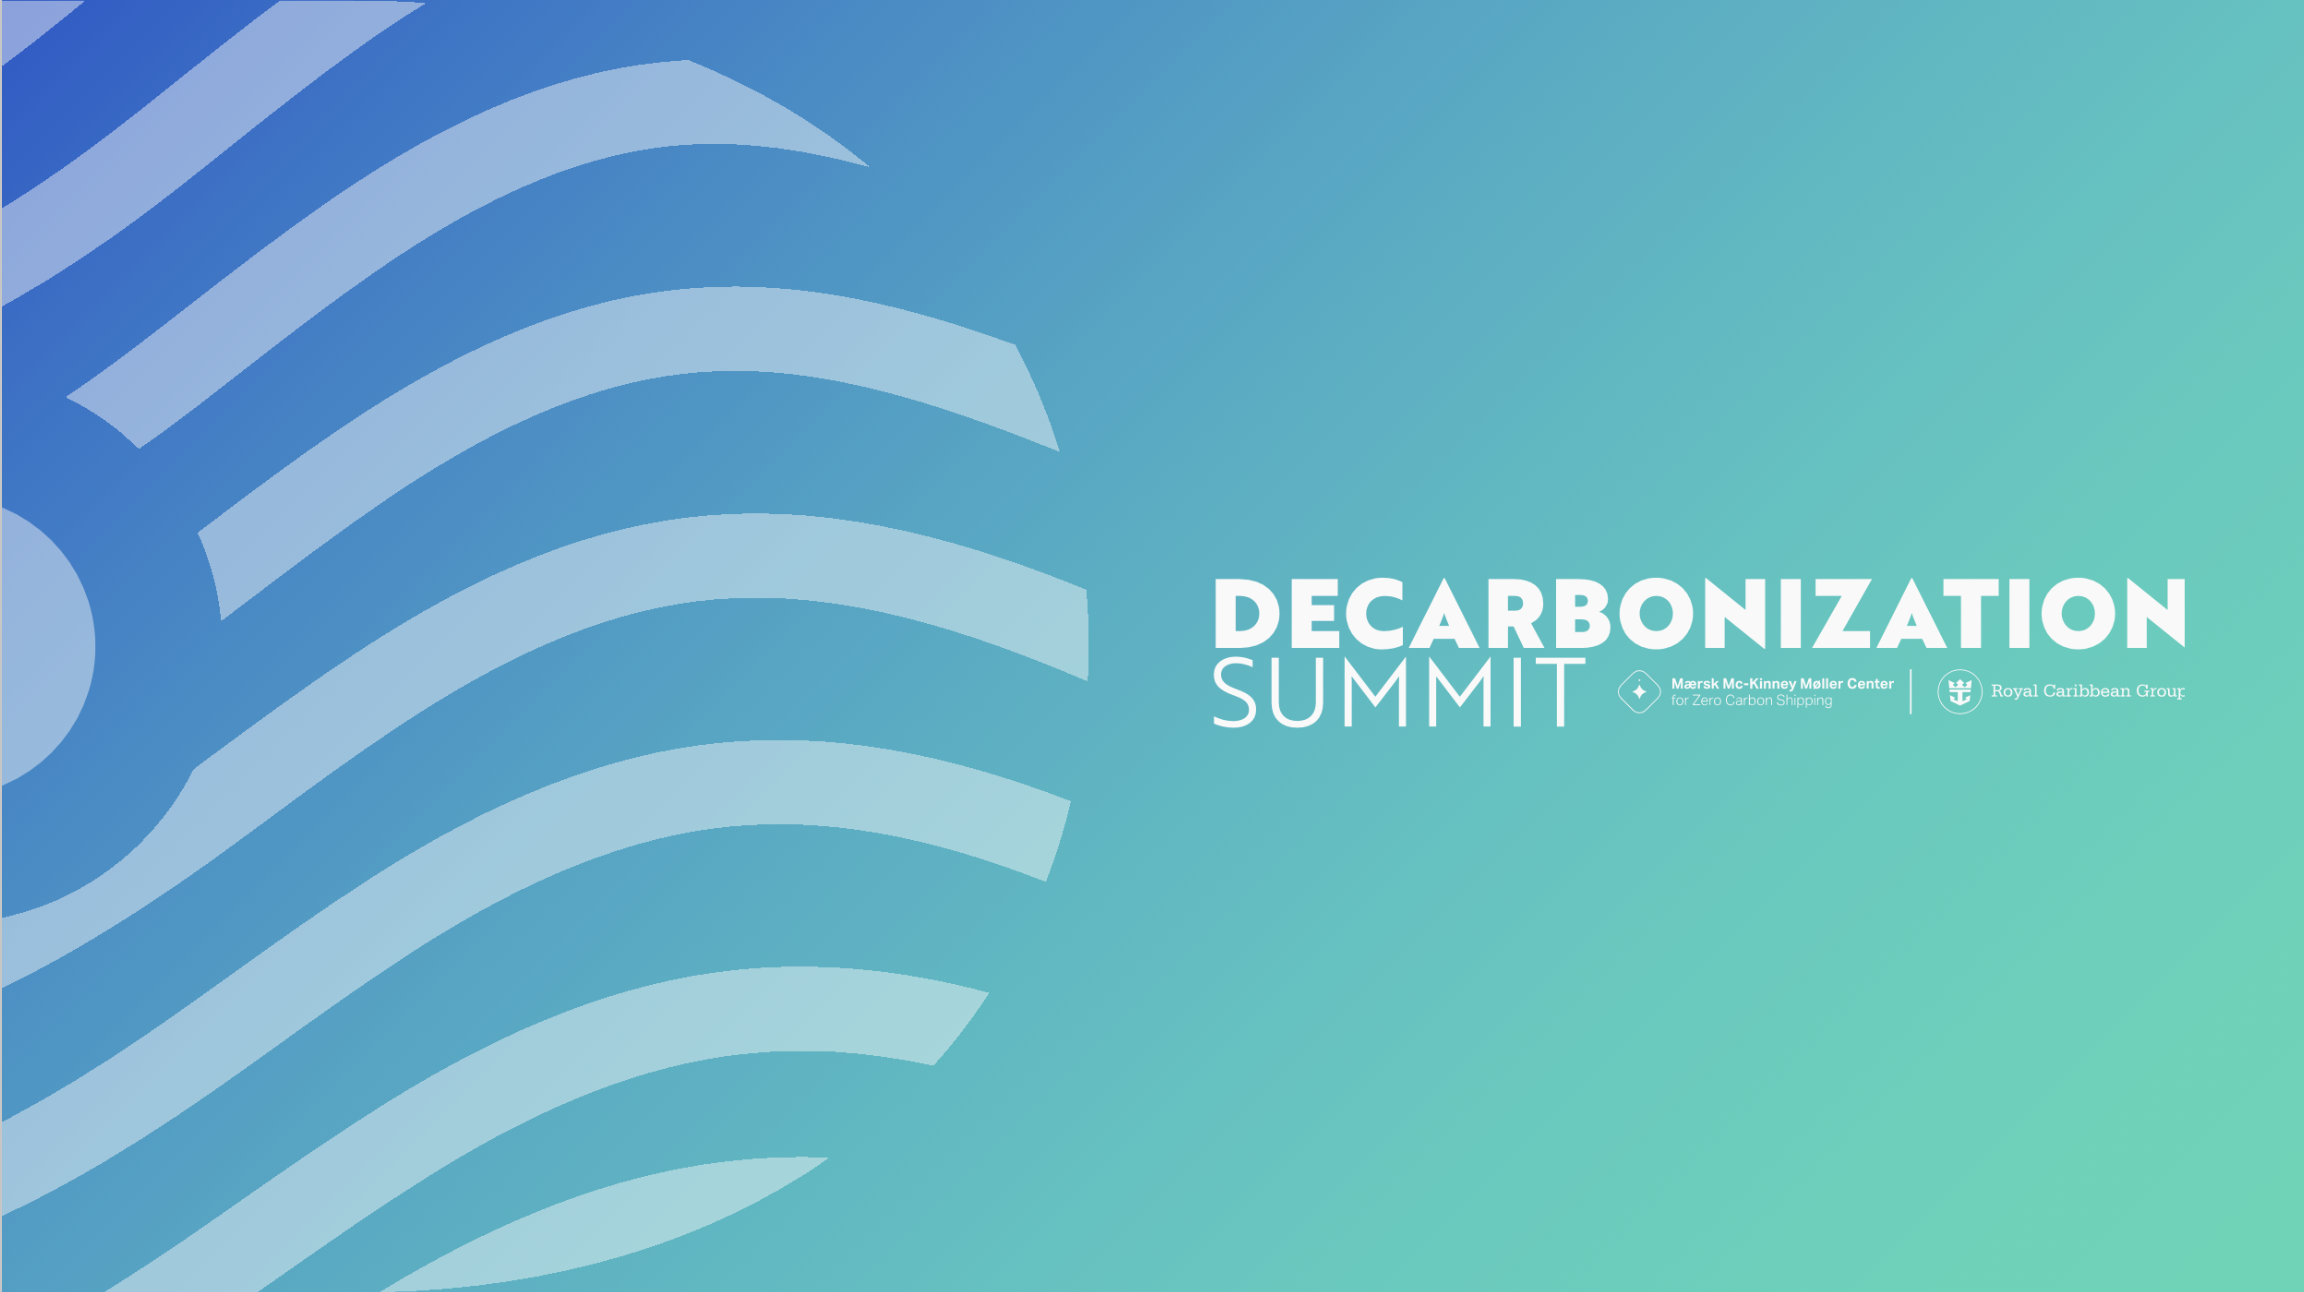 Navigating Toward a Sustainable Future: Royal Caribbean Group Convenes Maritime Industry Leaders for Collective Action on Decarbonization Goals